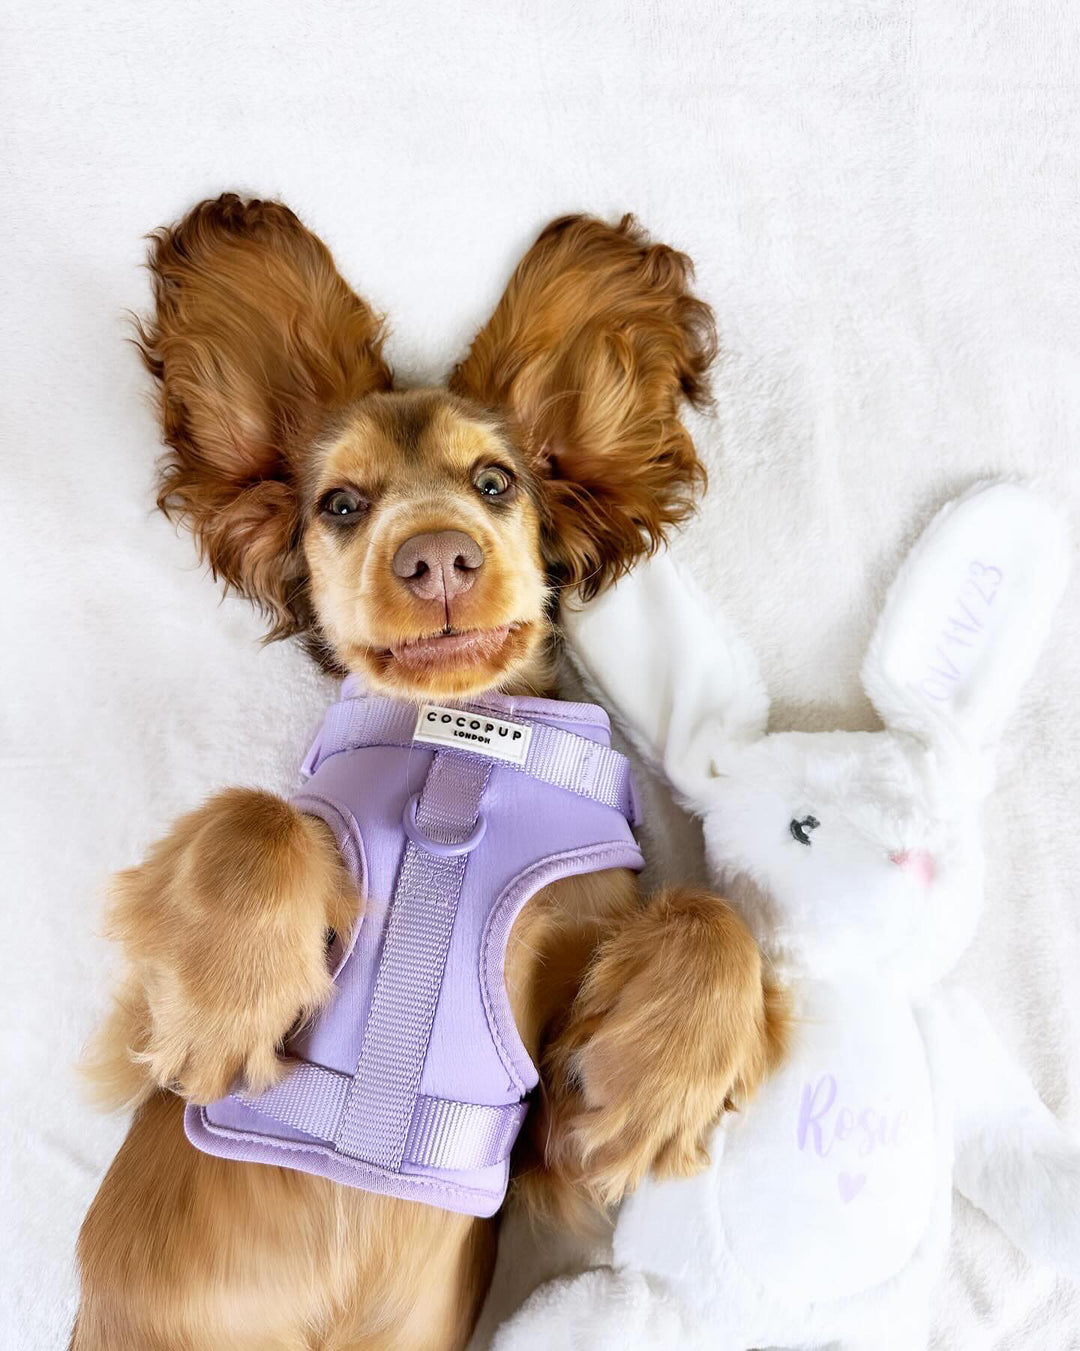 10 Egg-citing Easter Activities to Enjoy with Your Dog!